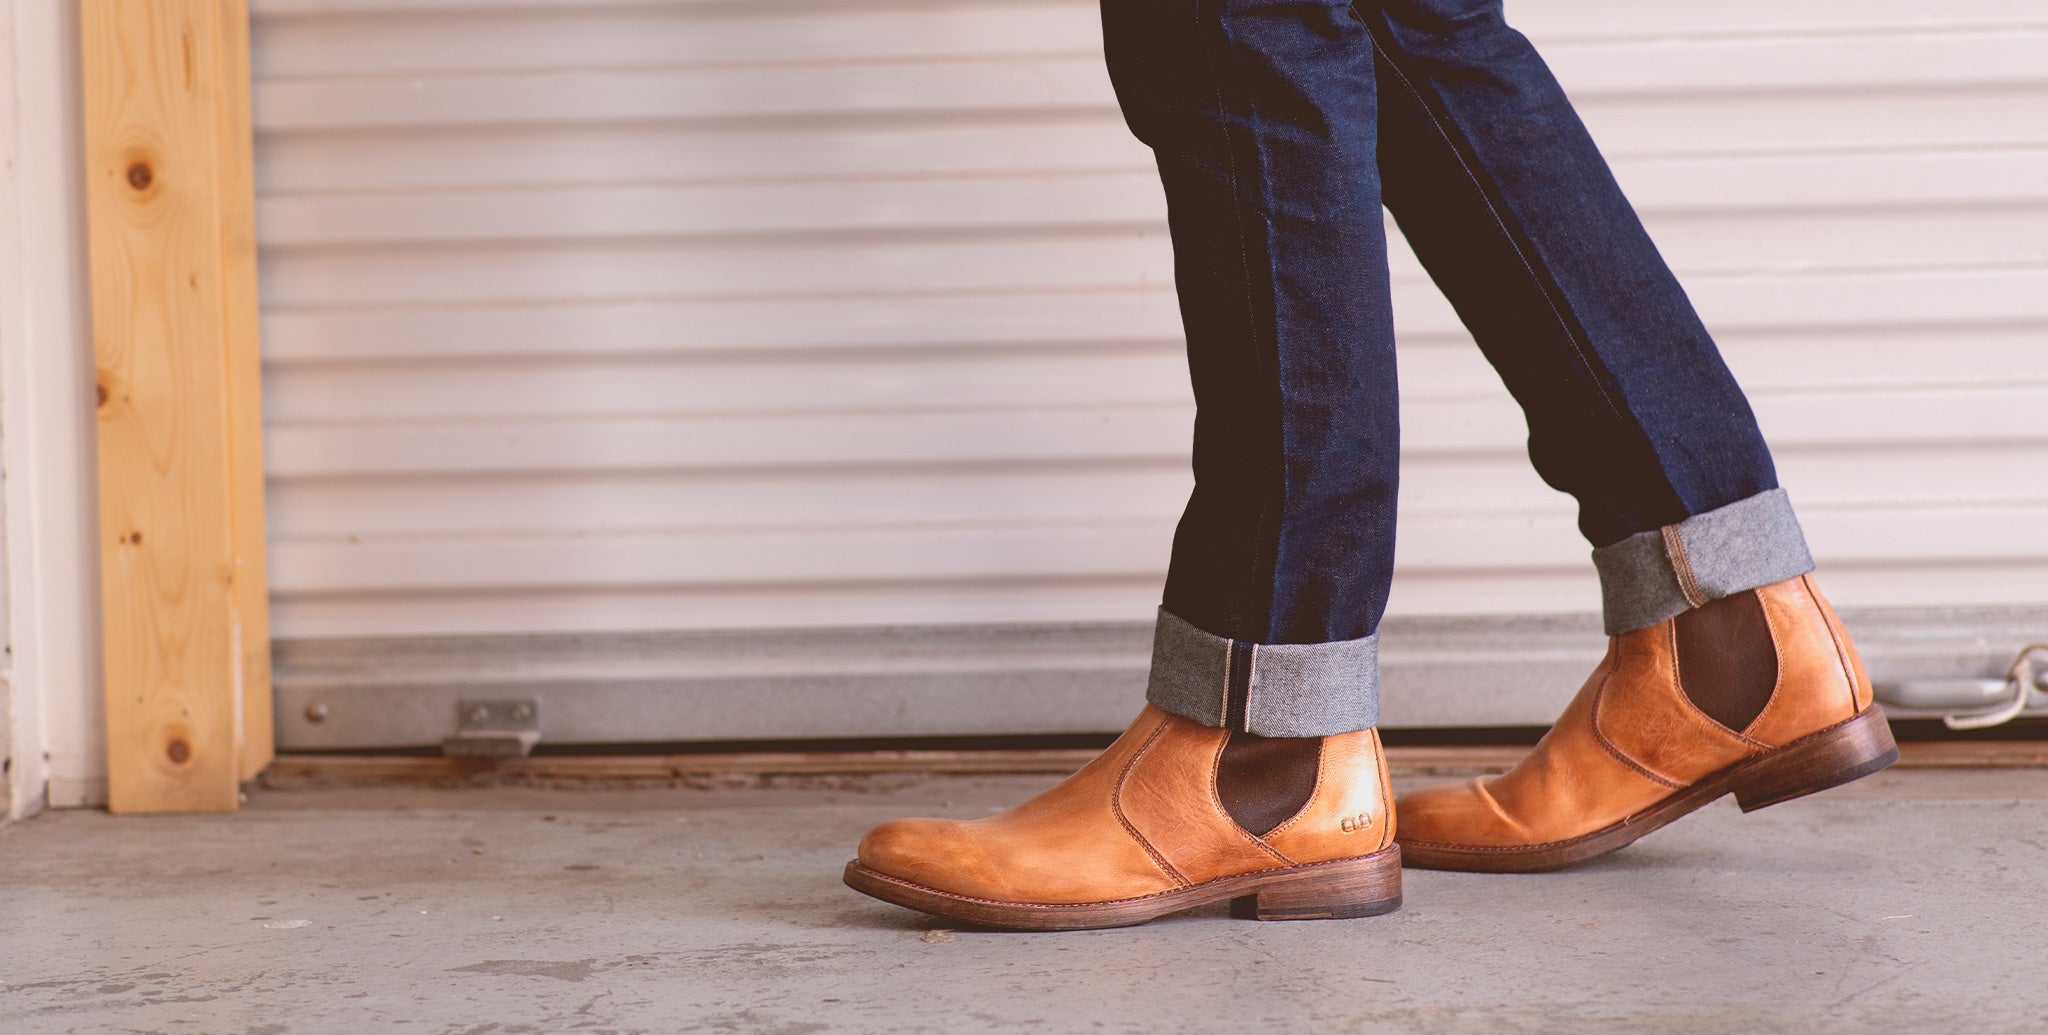 Man wearing tan boots with blue jeans walking in front of garage door.